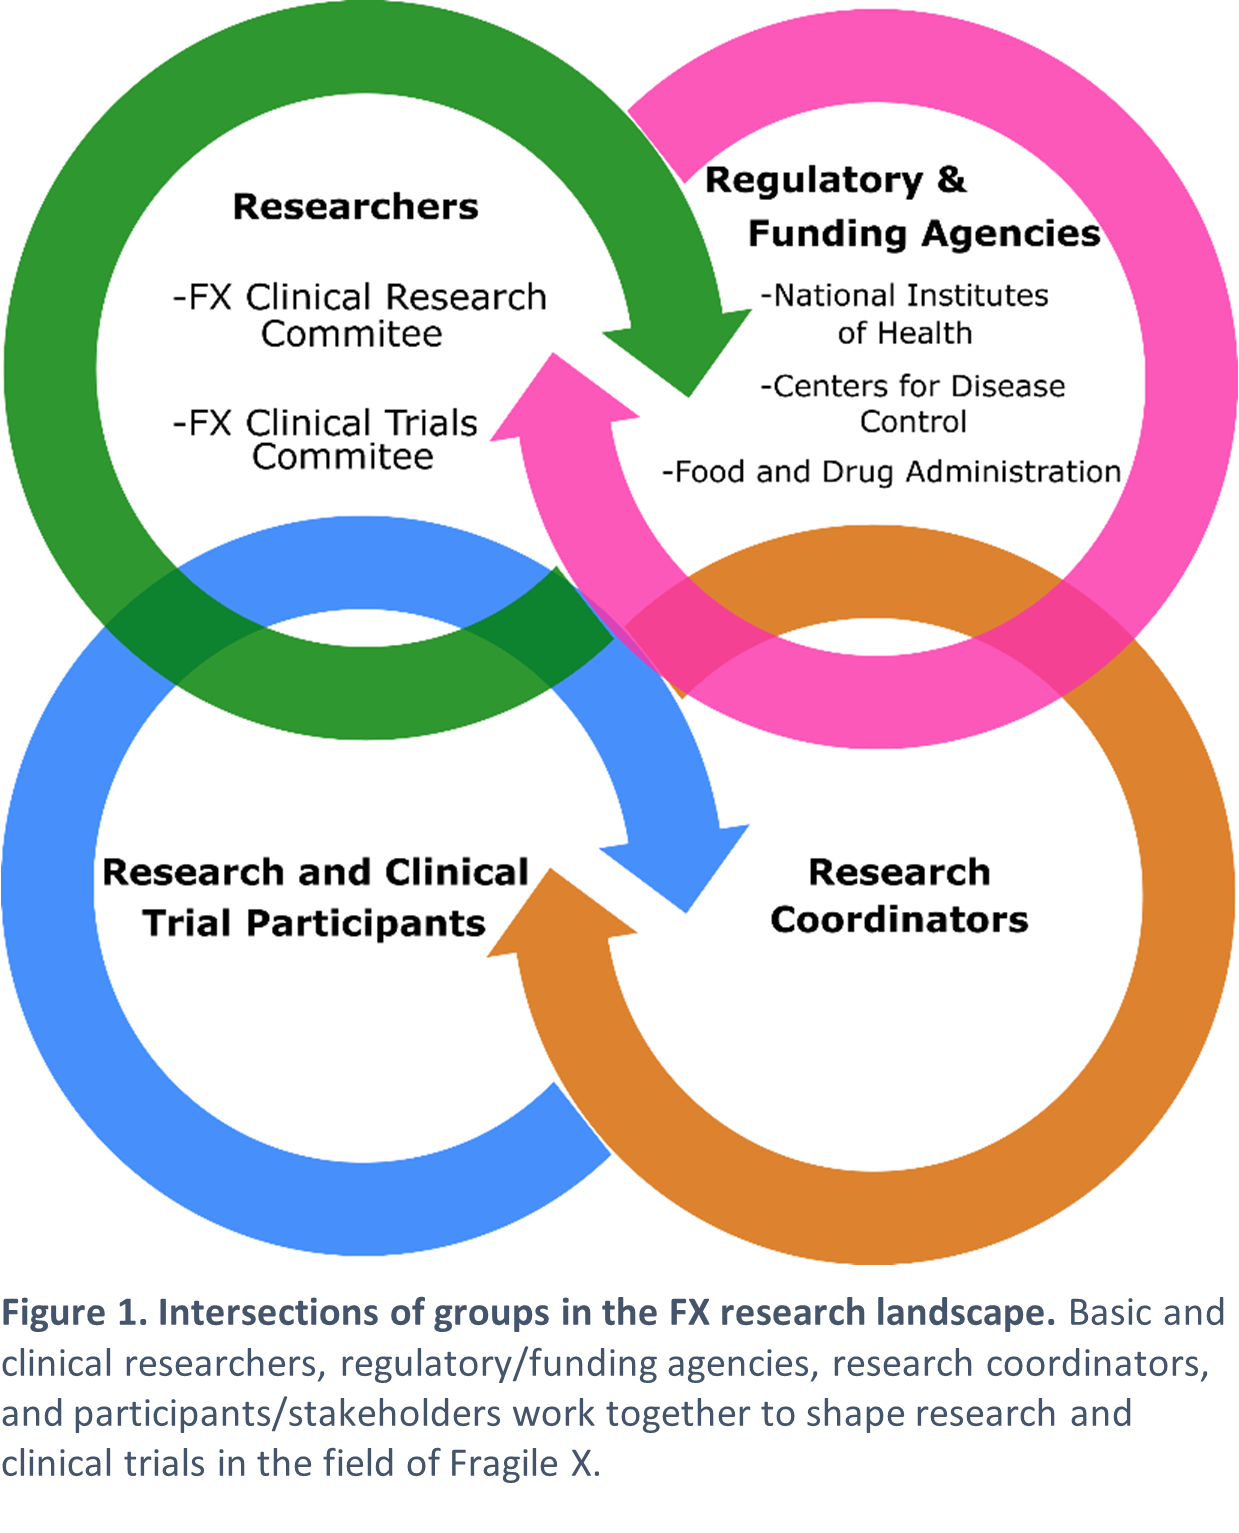 Four overlapping circles, each circle is one part of the Fragile X research landscape.